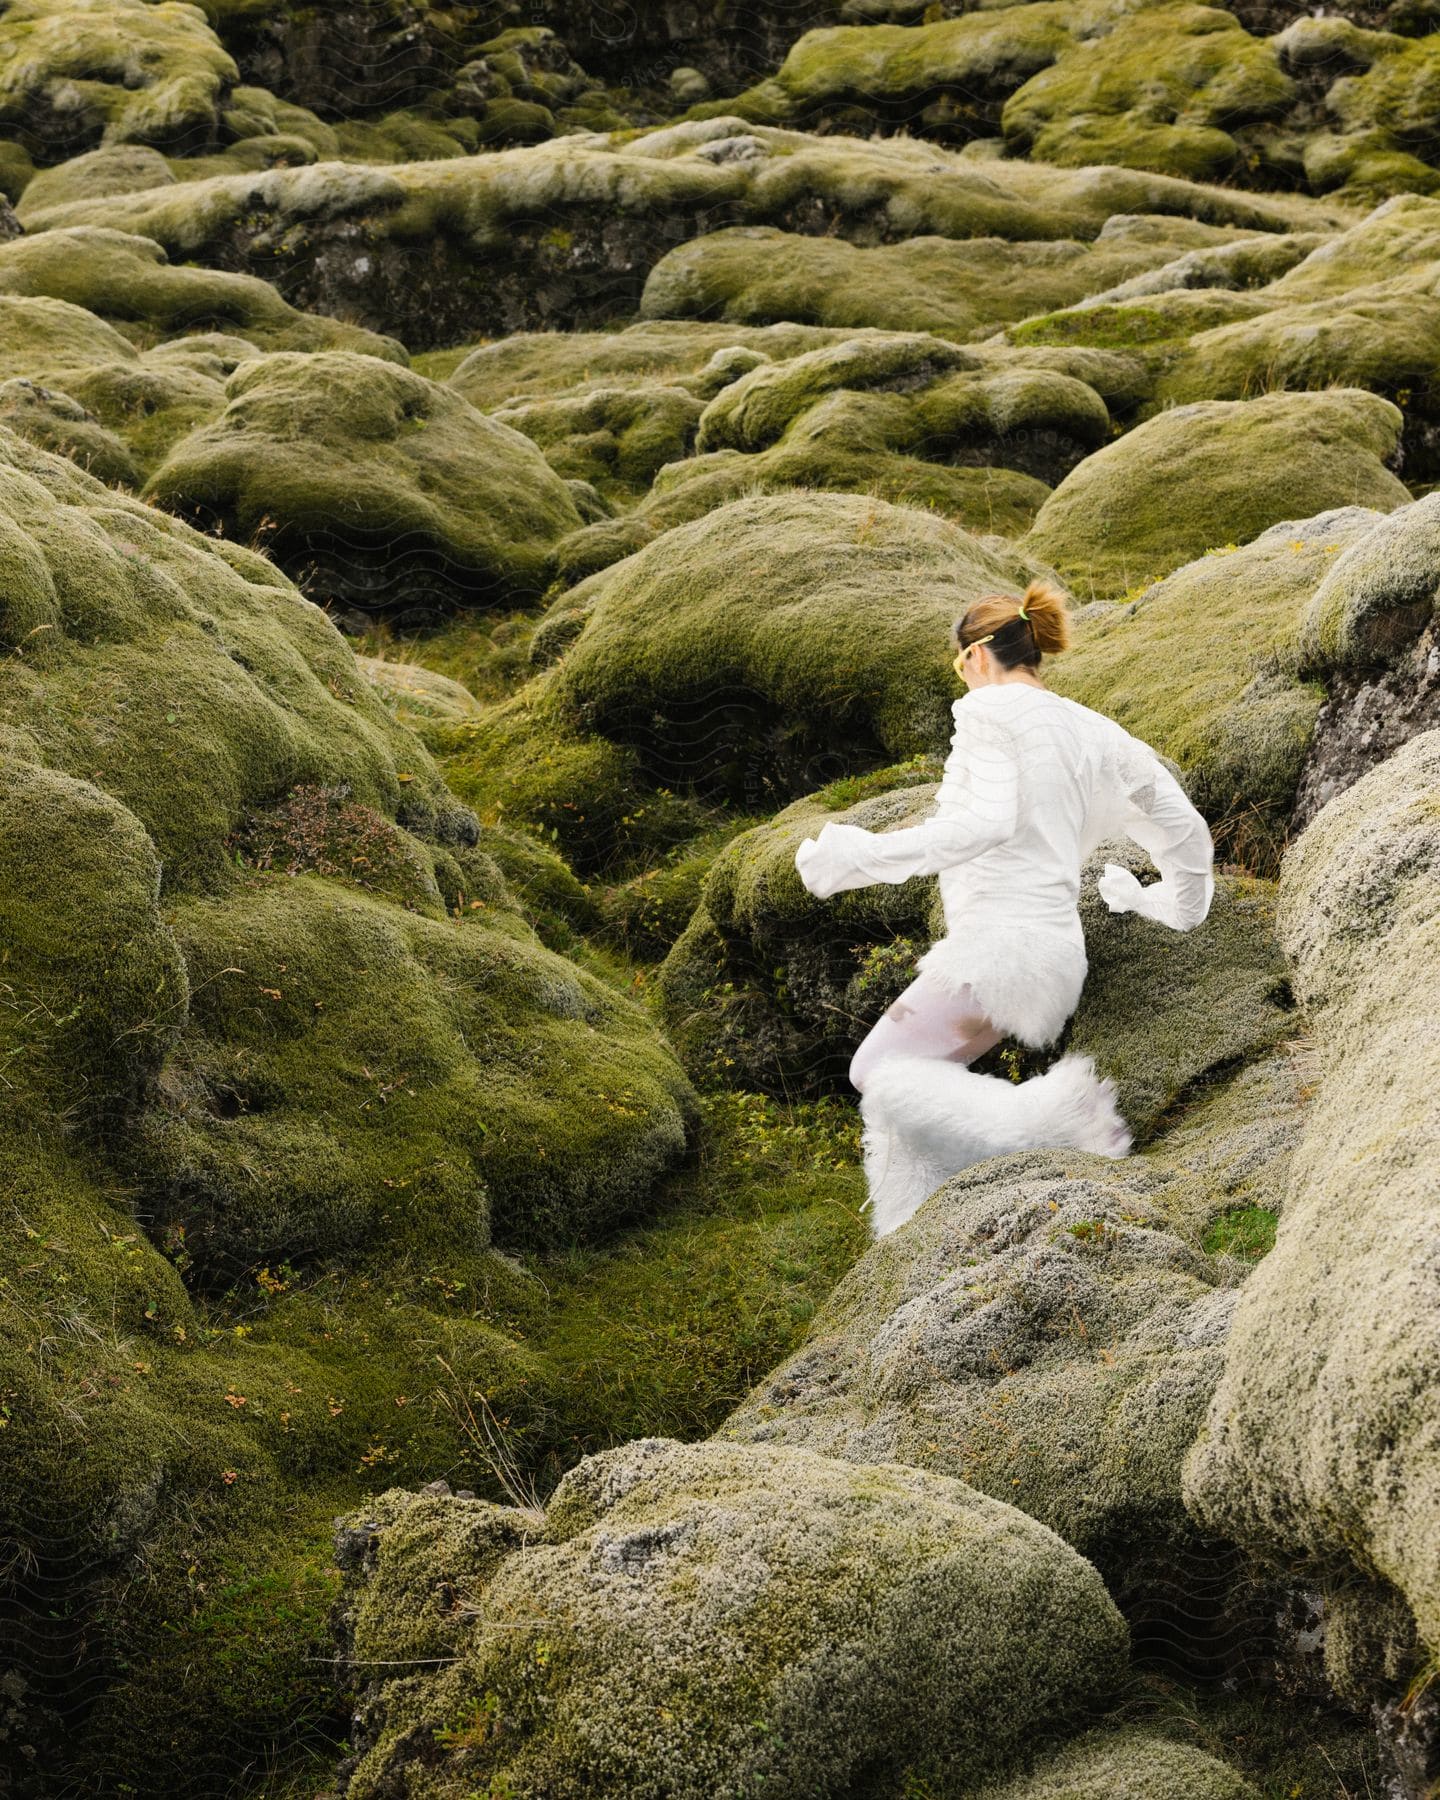 A woman wearing white clothes runs on a moss covered mountainside